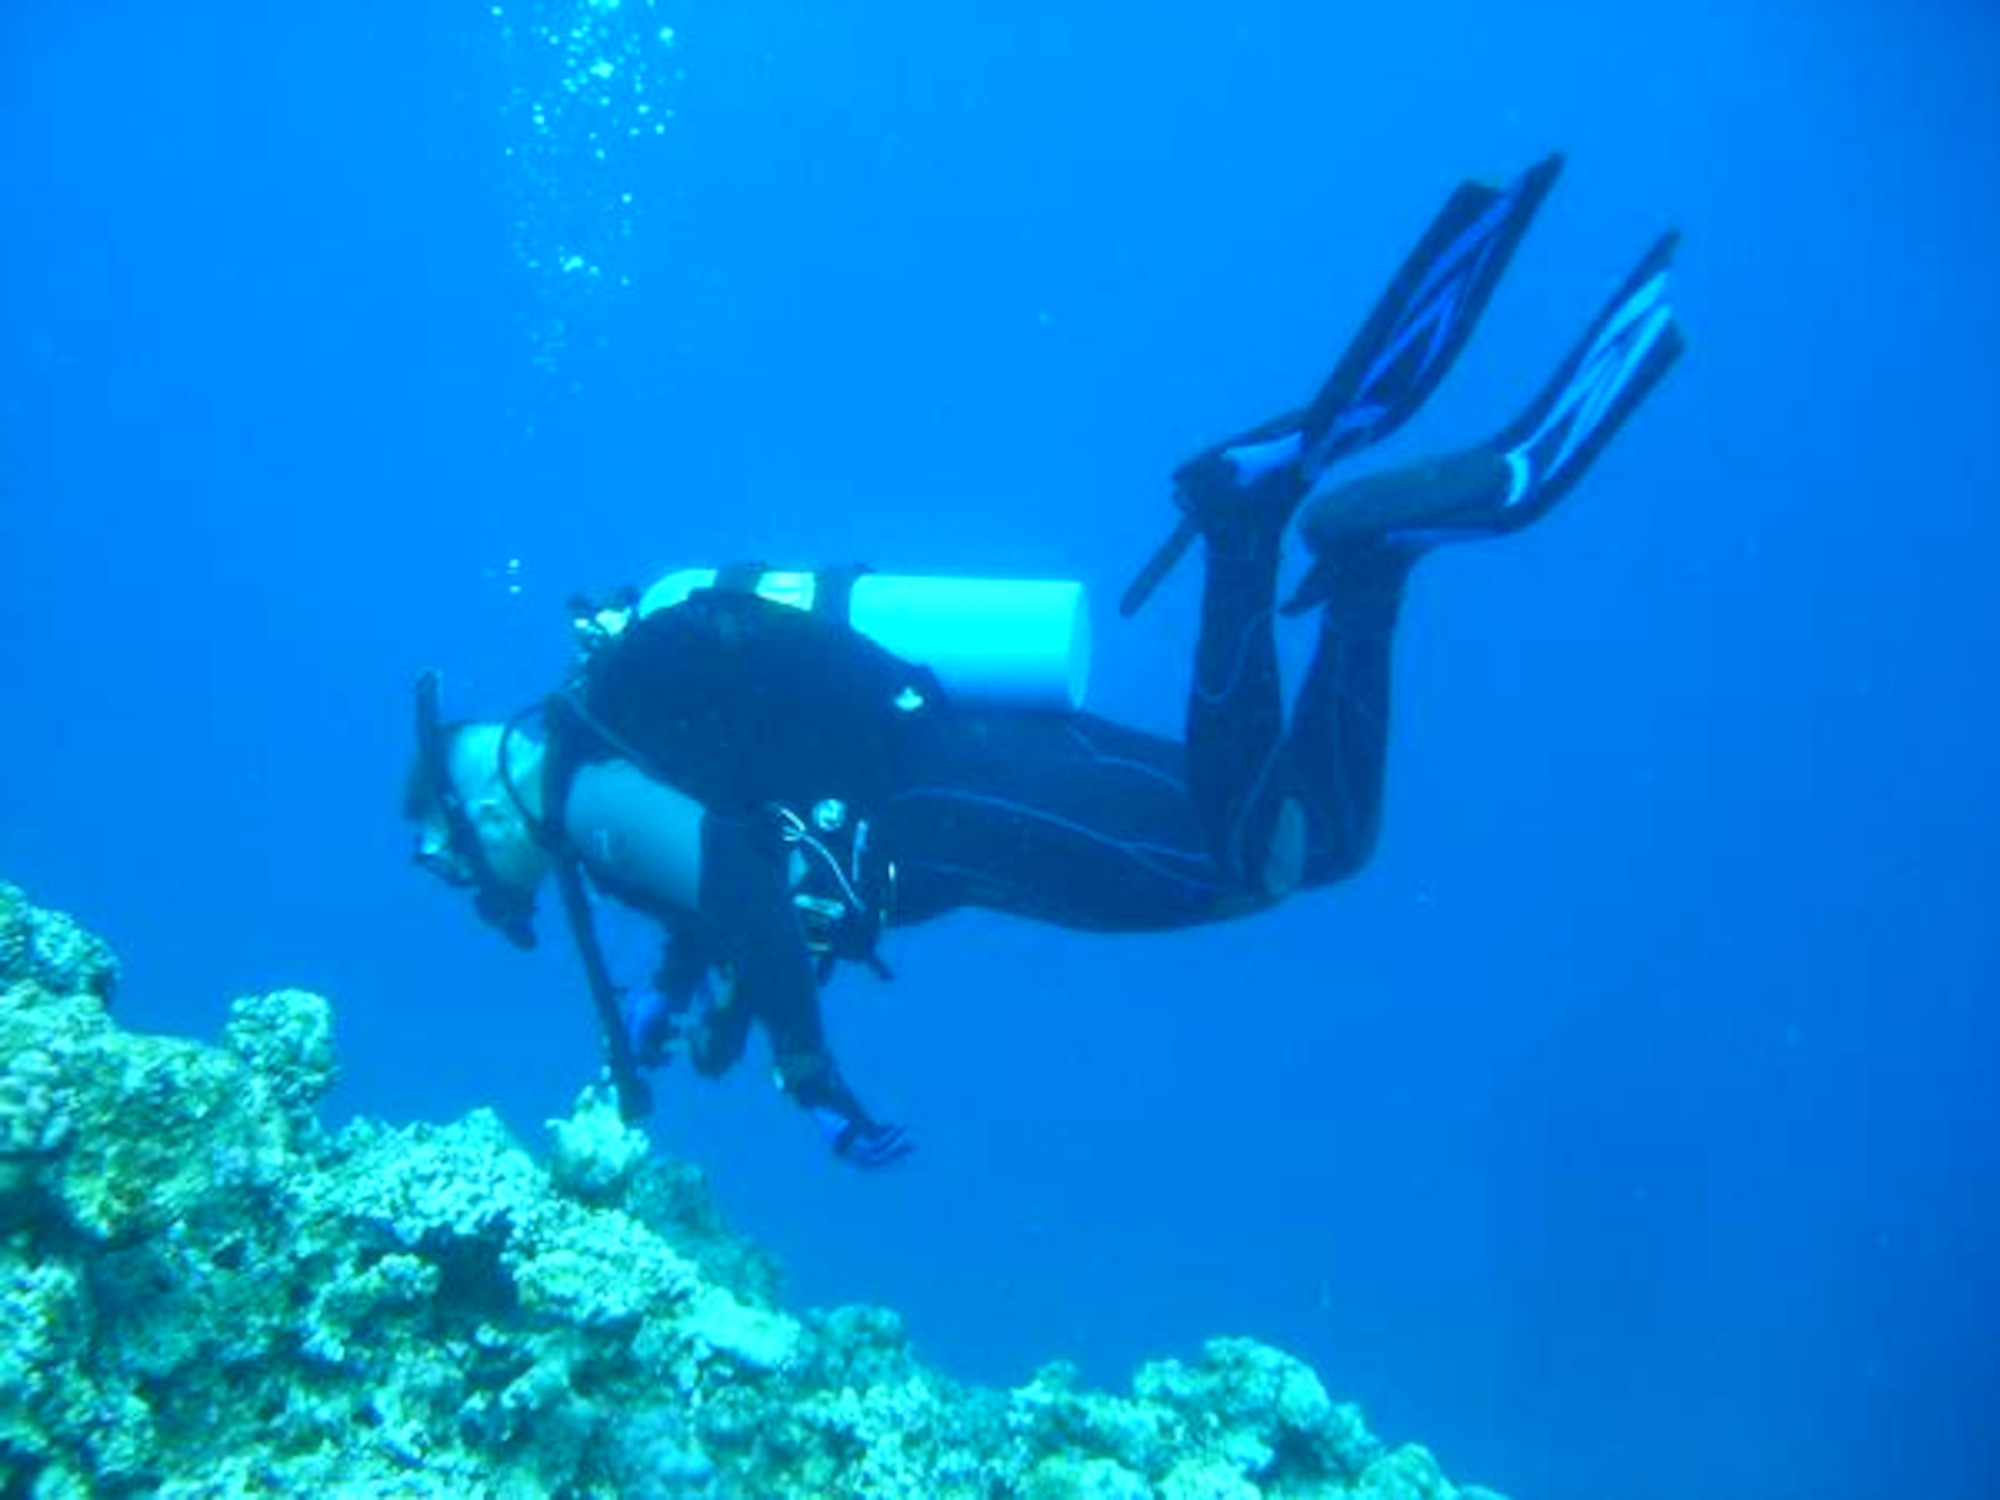 Senior Airman Jeremy East, 18th Communications Squadron, explores the beauty of the underwater world during a recent diving trip here. Dive instructors from the Kadena Marina Dive Shop want people to be aware of the variety of dangerous marine life in local waters and mindful of the delicate environment in the ocean. (Courtesy photo)